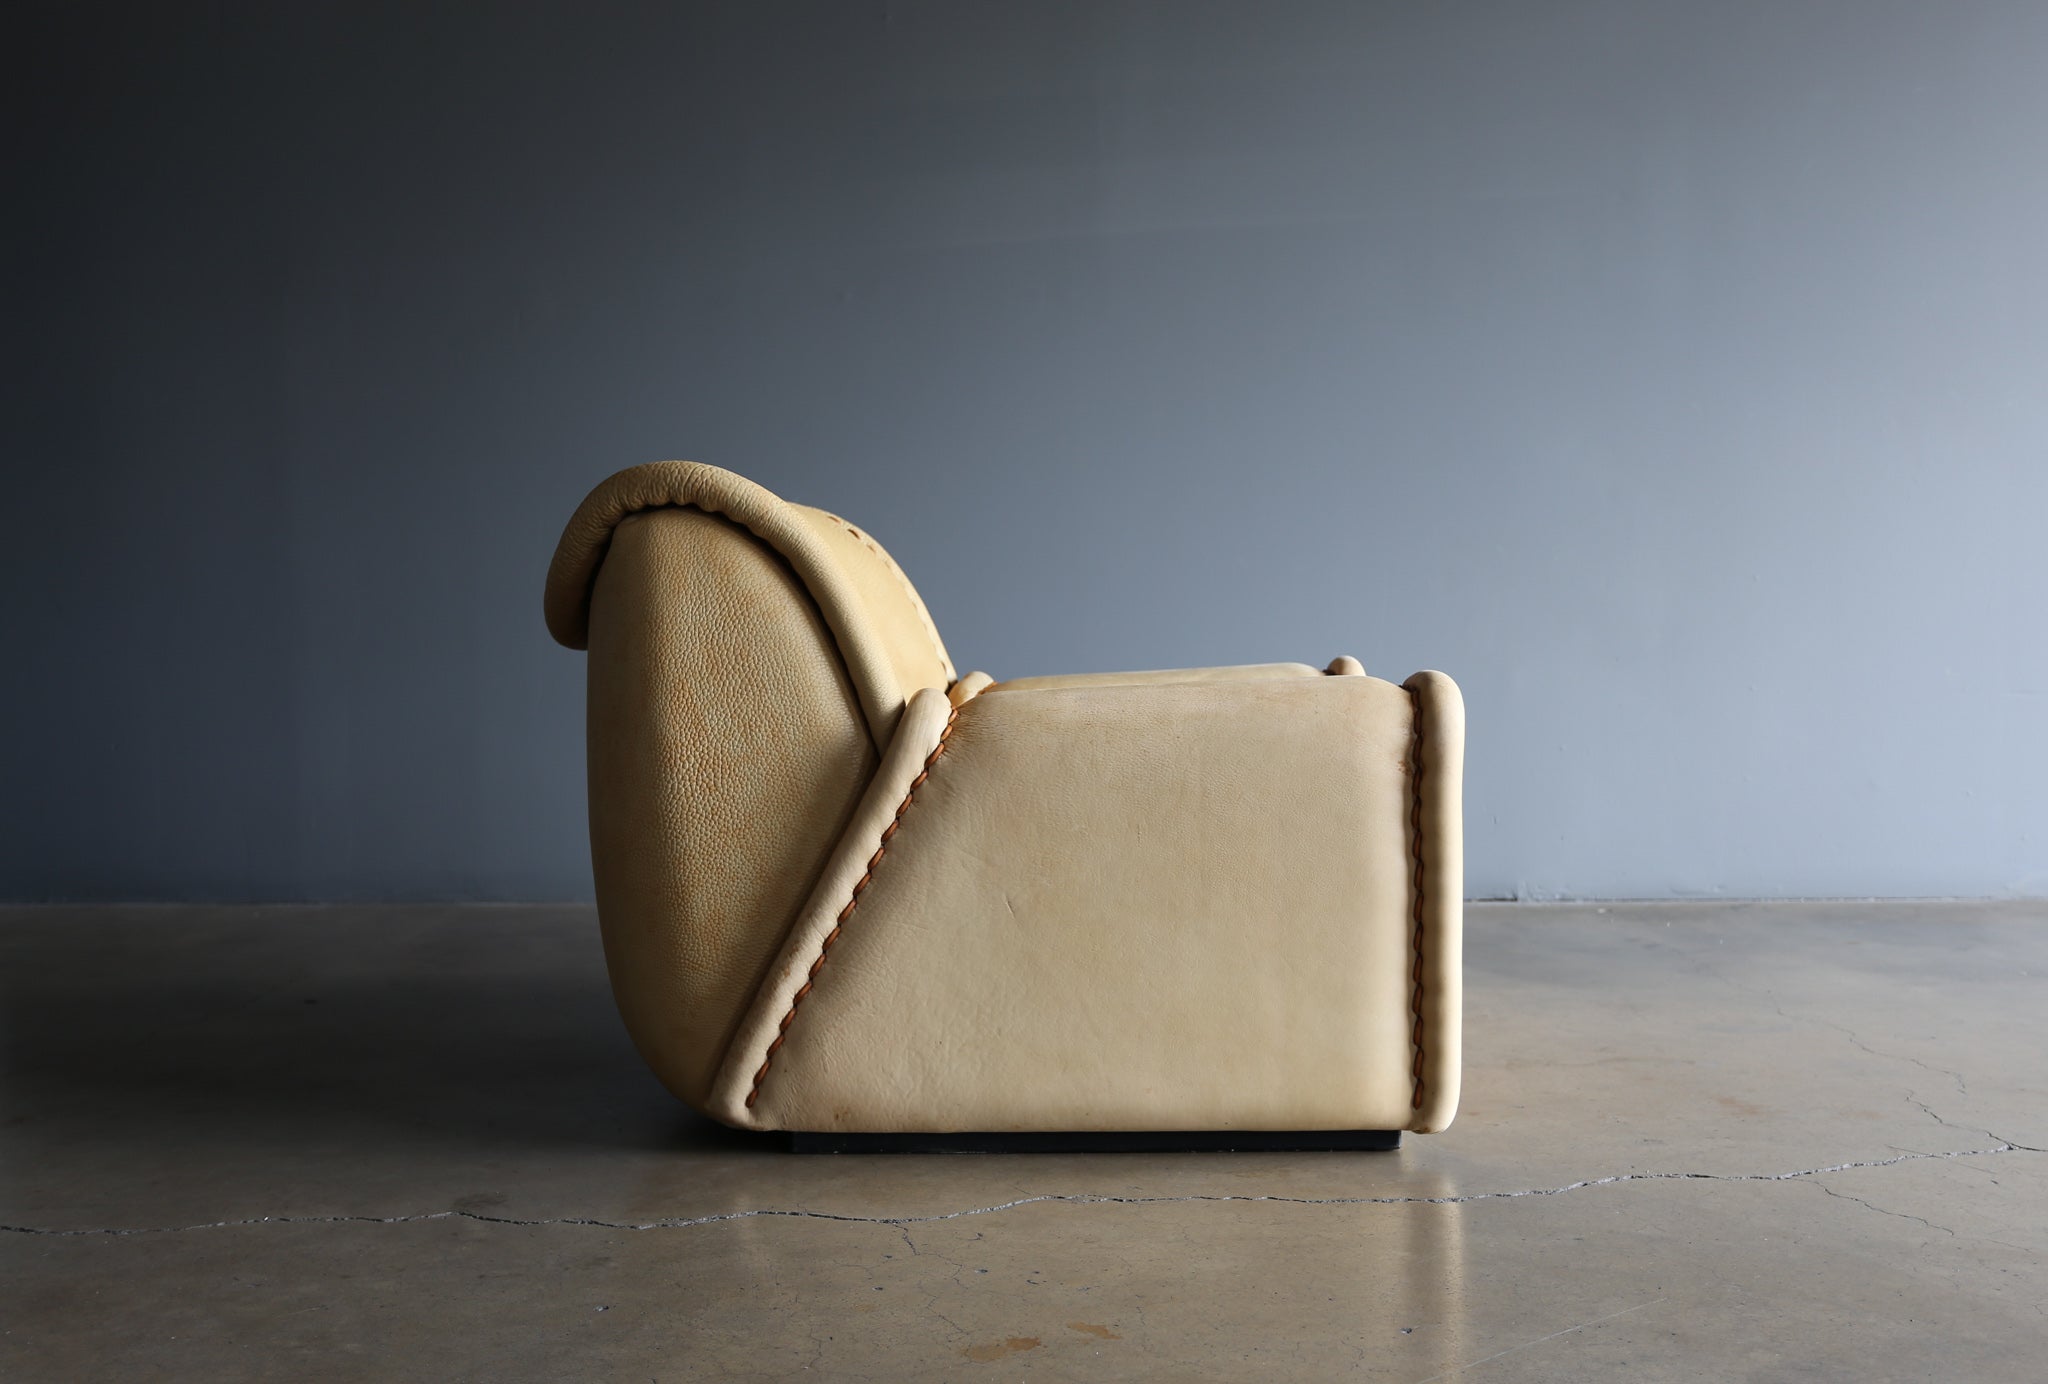 = SOLD = Ernst Lüthy "Sitting Bull" Lounge Chair and Ottoman for De Sede, 1982